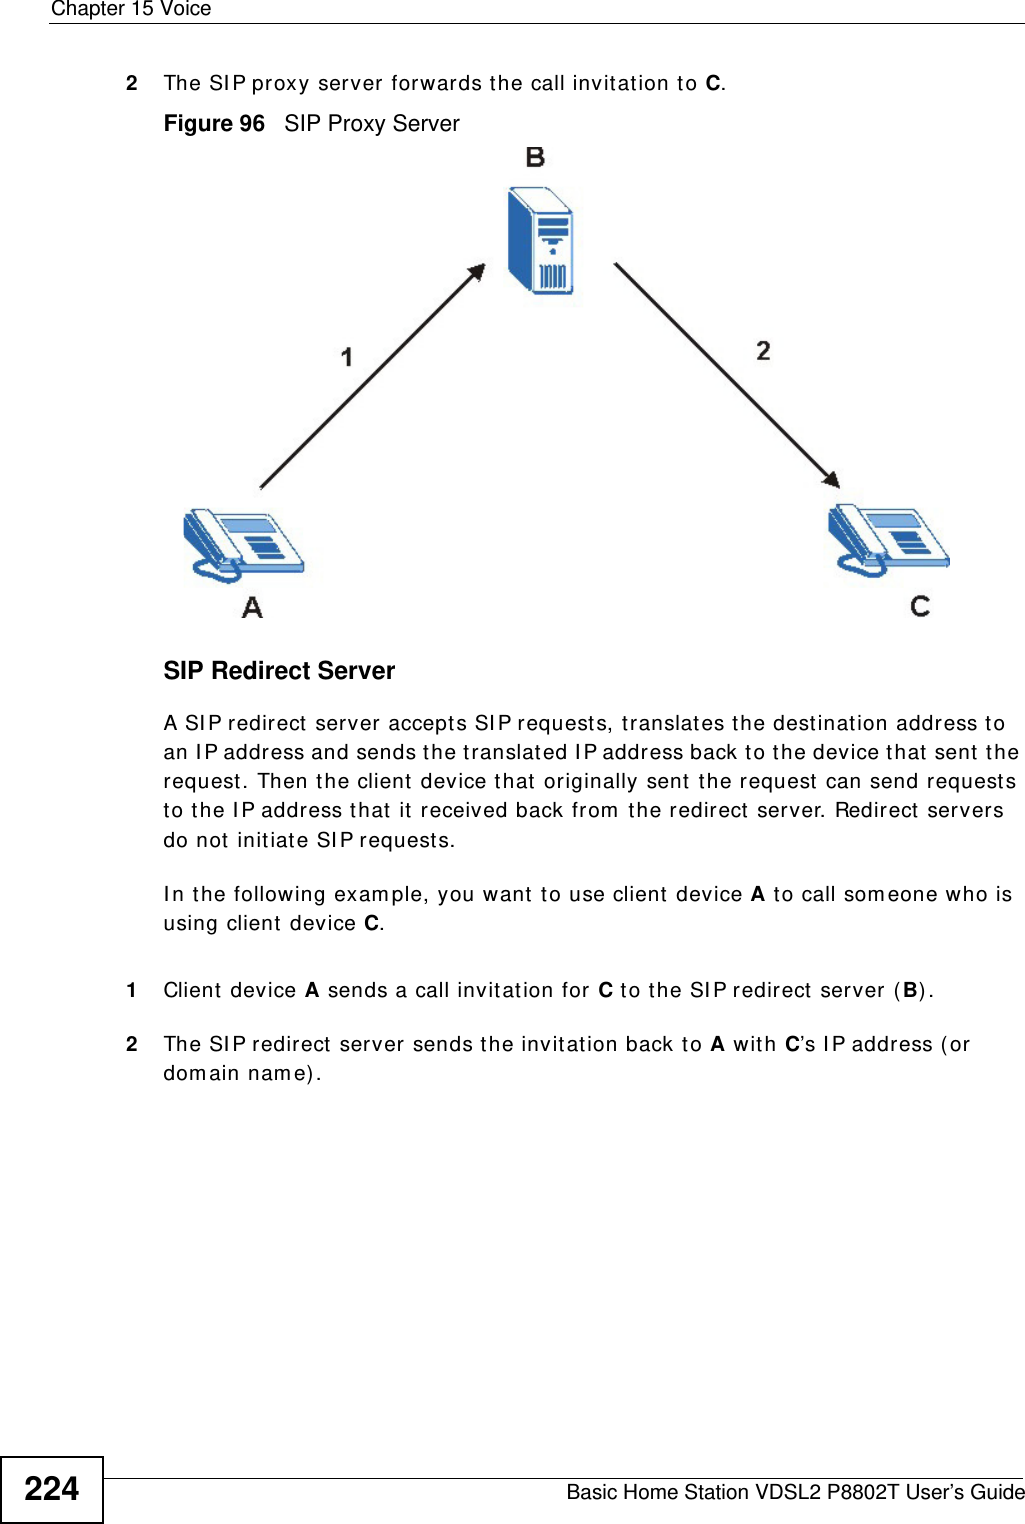 Chapter 15 VoiceBasic Home Station VDSL2 P8802T User’s Guide2242The SI P proxy server forwards the call invitat ion to C.Figure 96   SIP Proxy ServerSIP Redirect ServerA SI P redirect server accept s SI P requests, t ranslat es the dest inat ion address to an I P address and sends t he translat ed I P address back to the device t hat sent the request. Then the client device that  originally sent the request  can send requests to the I P address that  it received back from  t he redirect  server. Redirect  servers do not  initiate SI P request s. I n the following exam ple, you want  t o use client  device A to call som eone who is using client device C. 1Client  device A sends a call invit ation for C to t he SI P redirect  server (B) .2The SI P redirect  server sends t he invit ation back to A with C’s I P addr ess ( or  dom ain nam e).